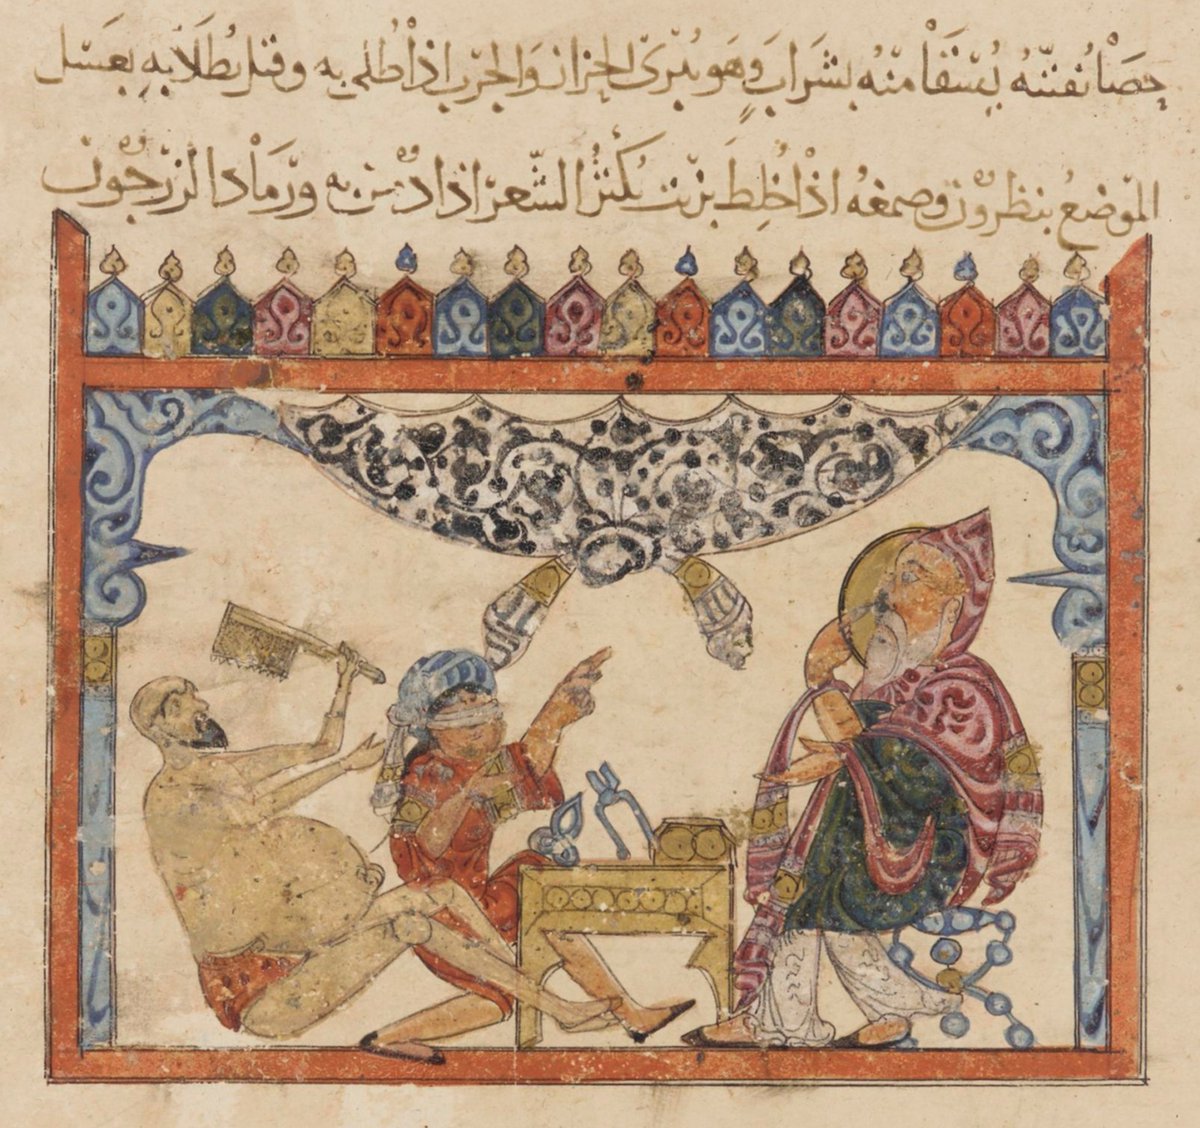 Physician with two patients, Baghdad 1224 (Smithsonian Institution, Sackler Gallery SI986.97a)